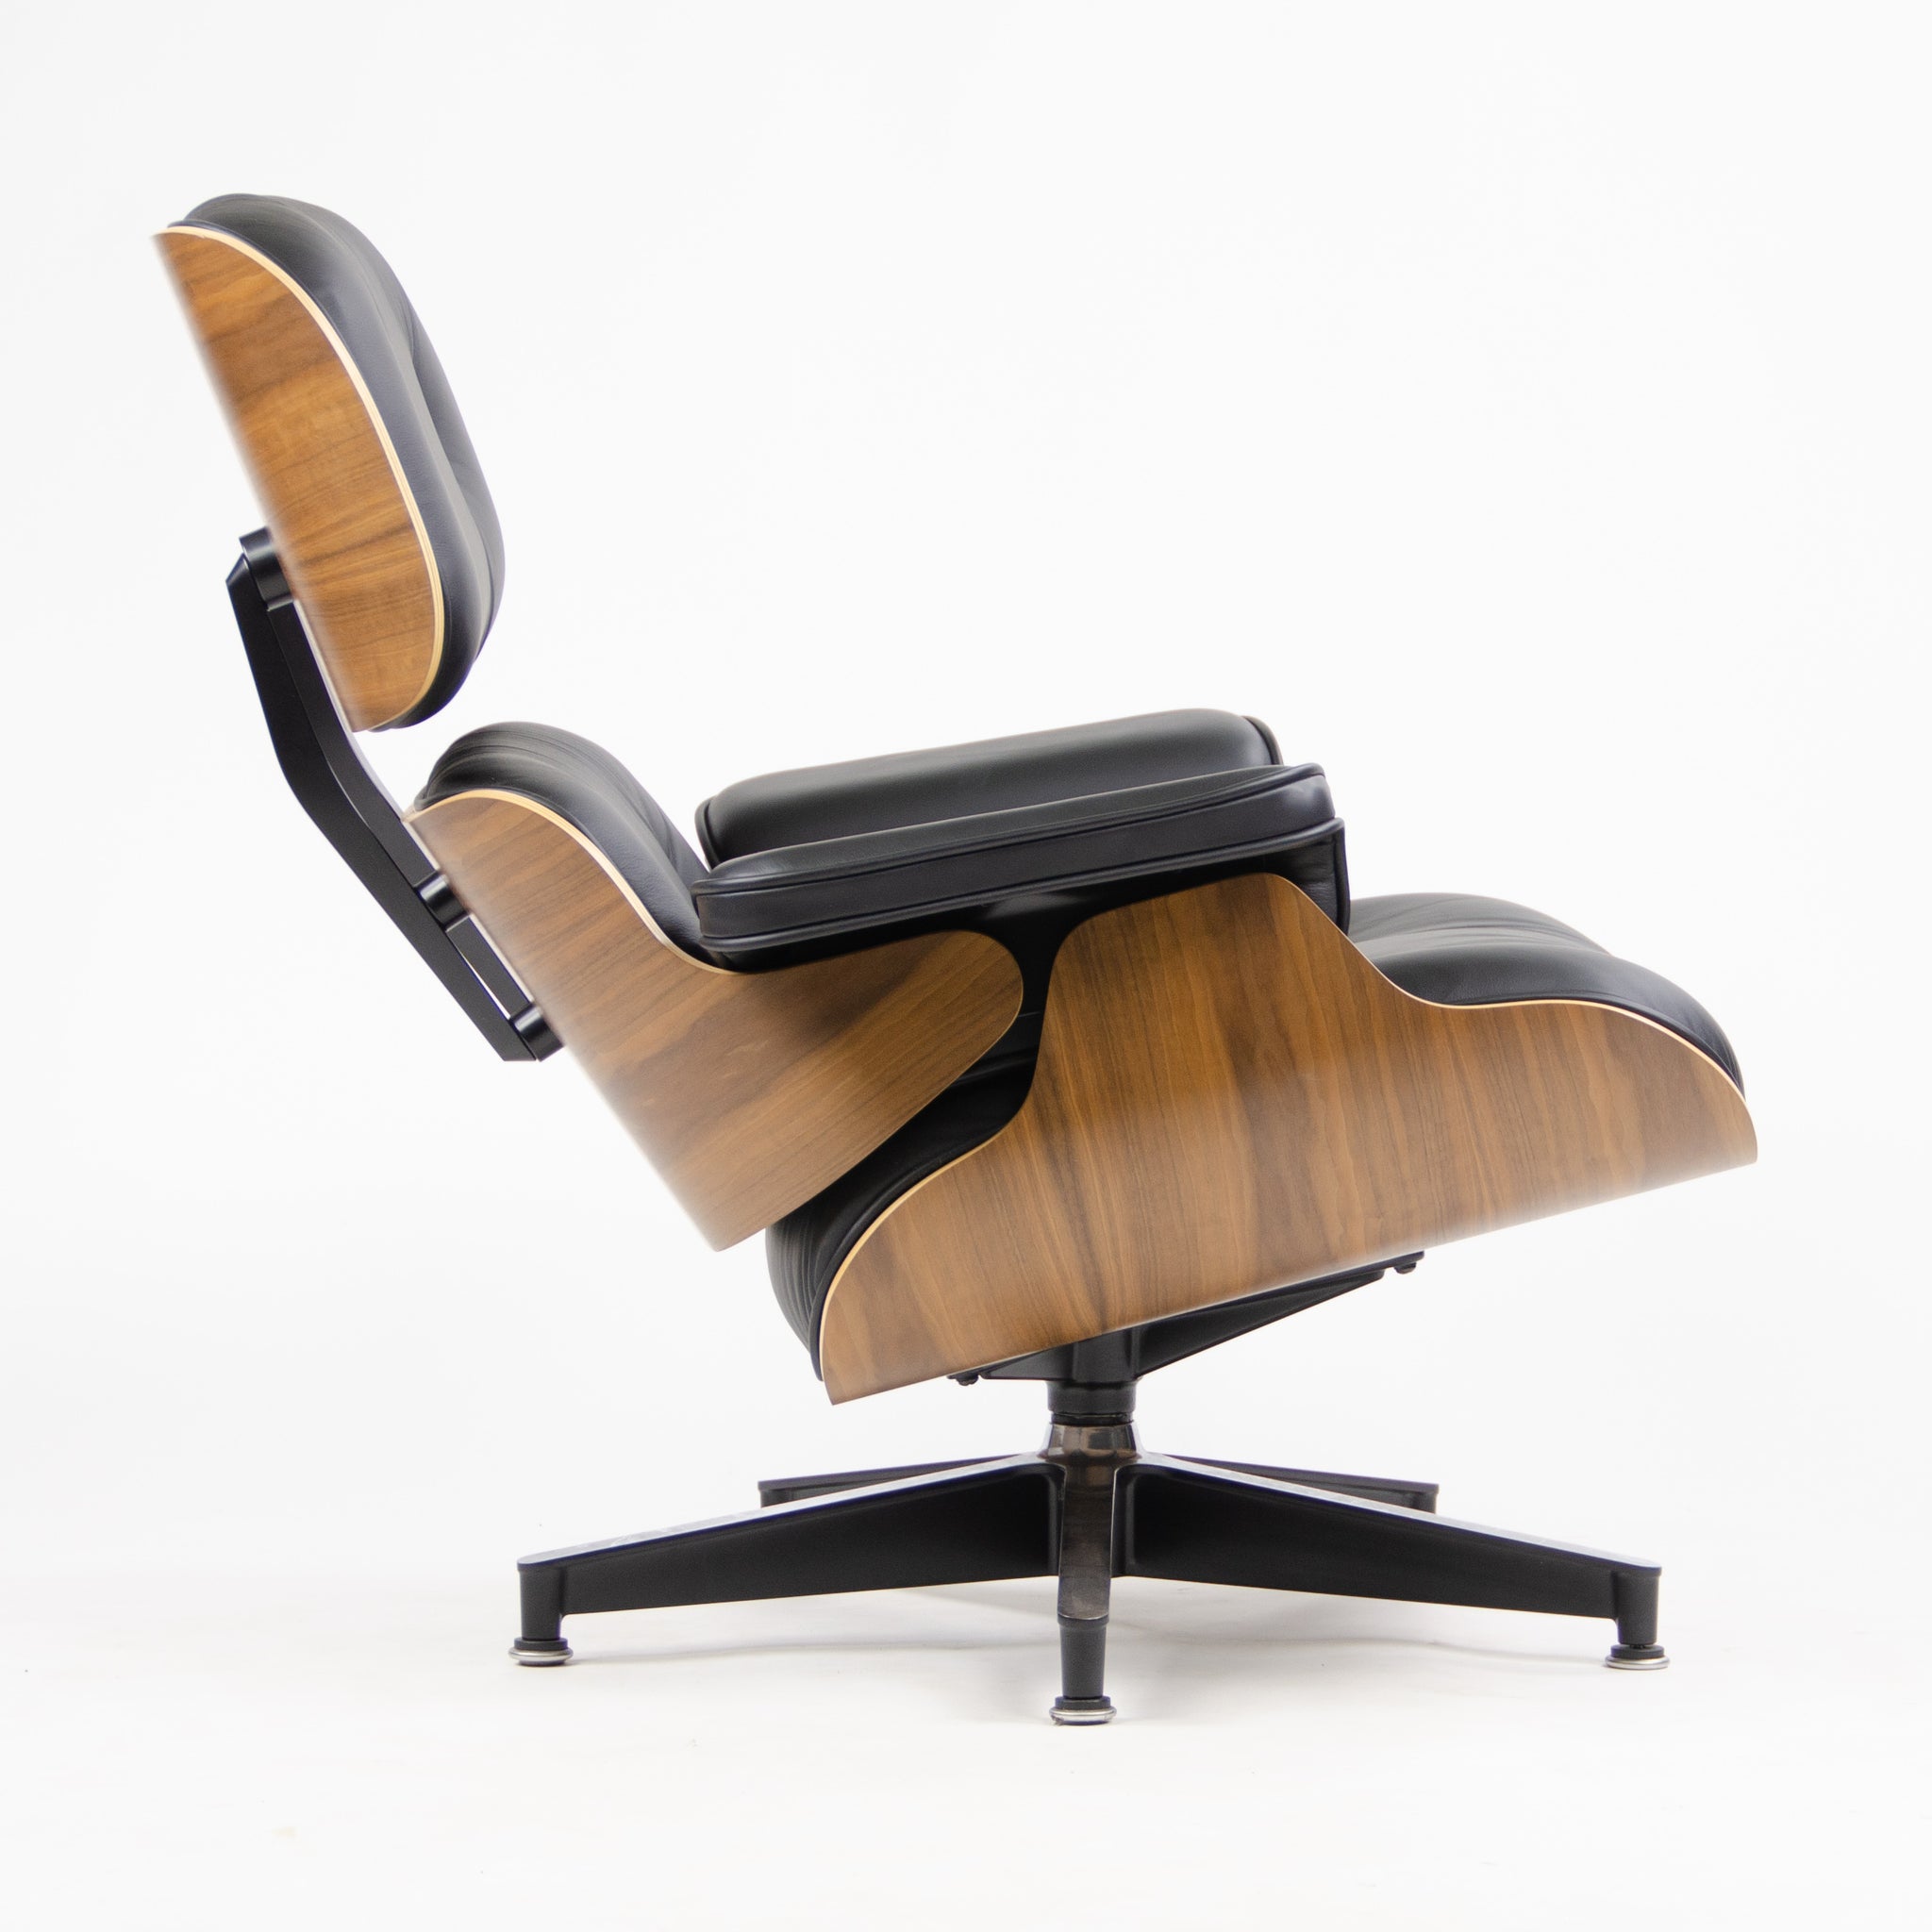 SOLD 2015 New Herman Miller Eames Lounge Chair & Ottoman Walnut 670 671 Black Leather